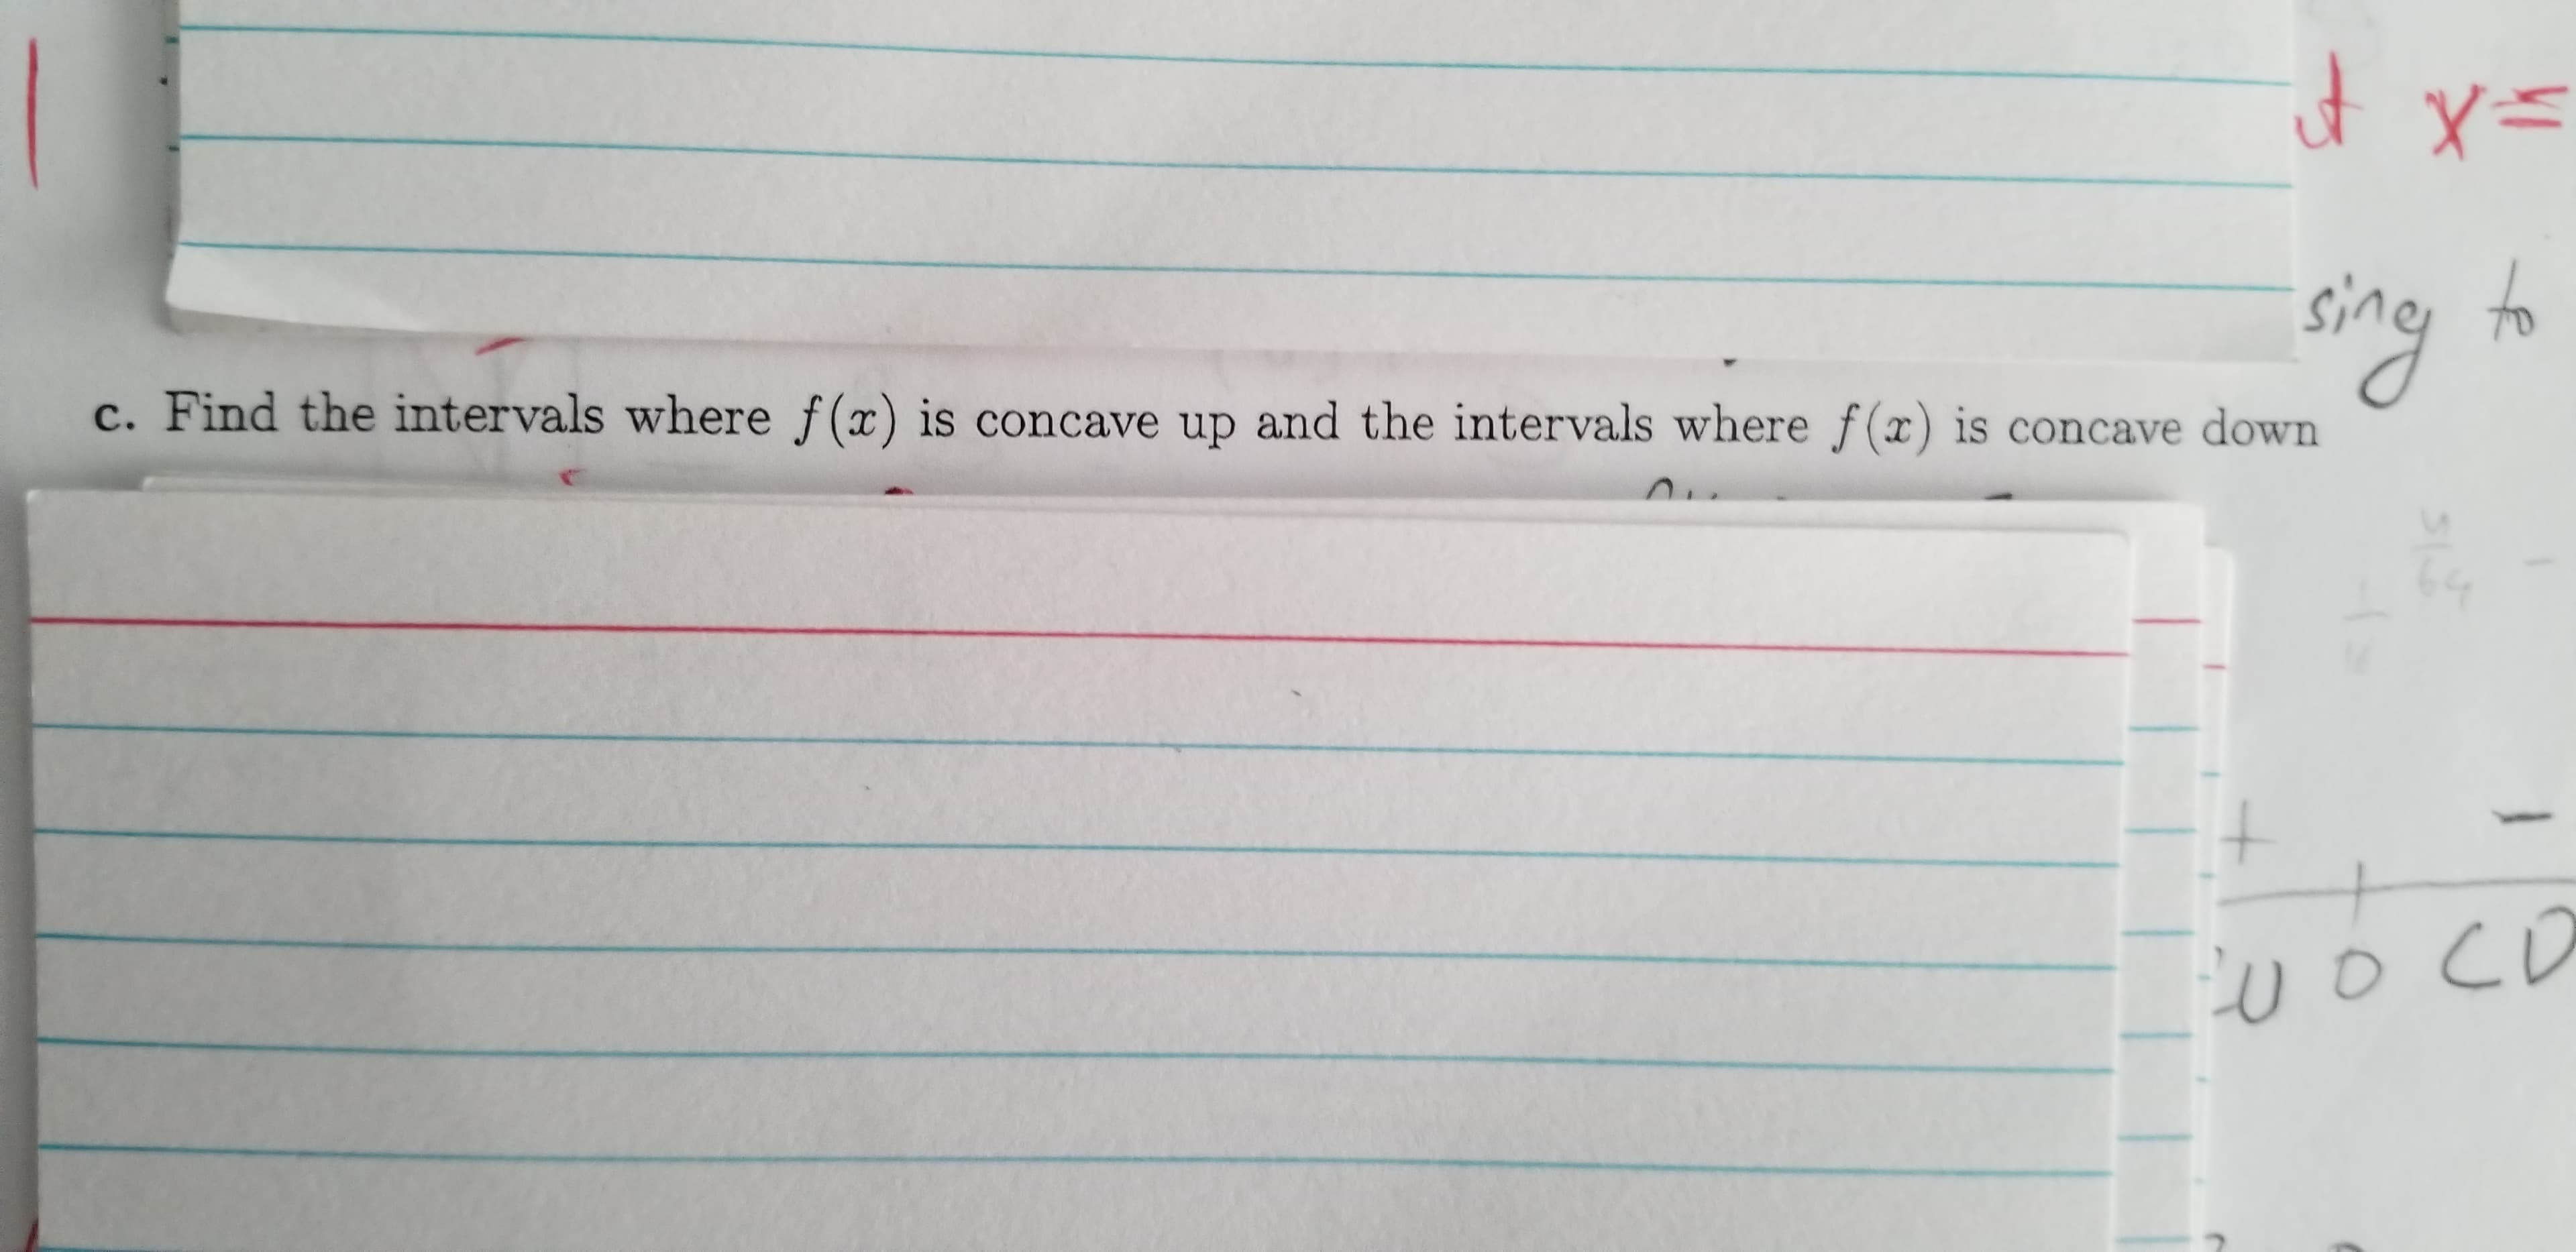 tx=
to
sing
c. Find the intervals where f(x) is concave up and the intervals where f(x) is concave down
o CD
